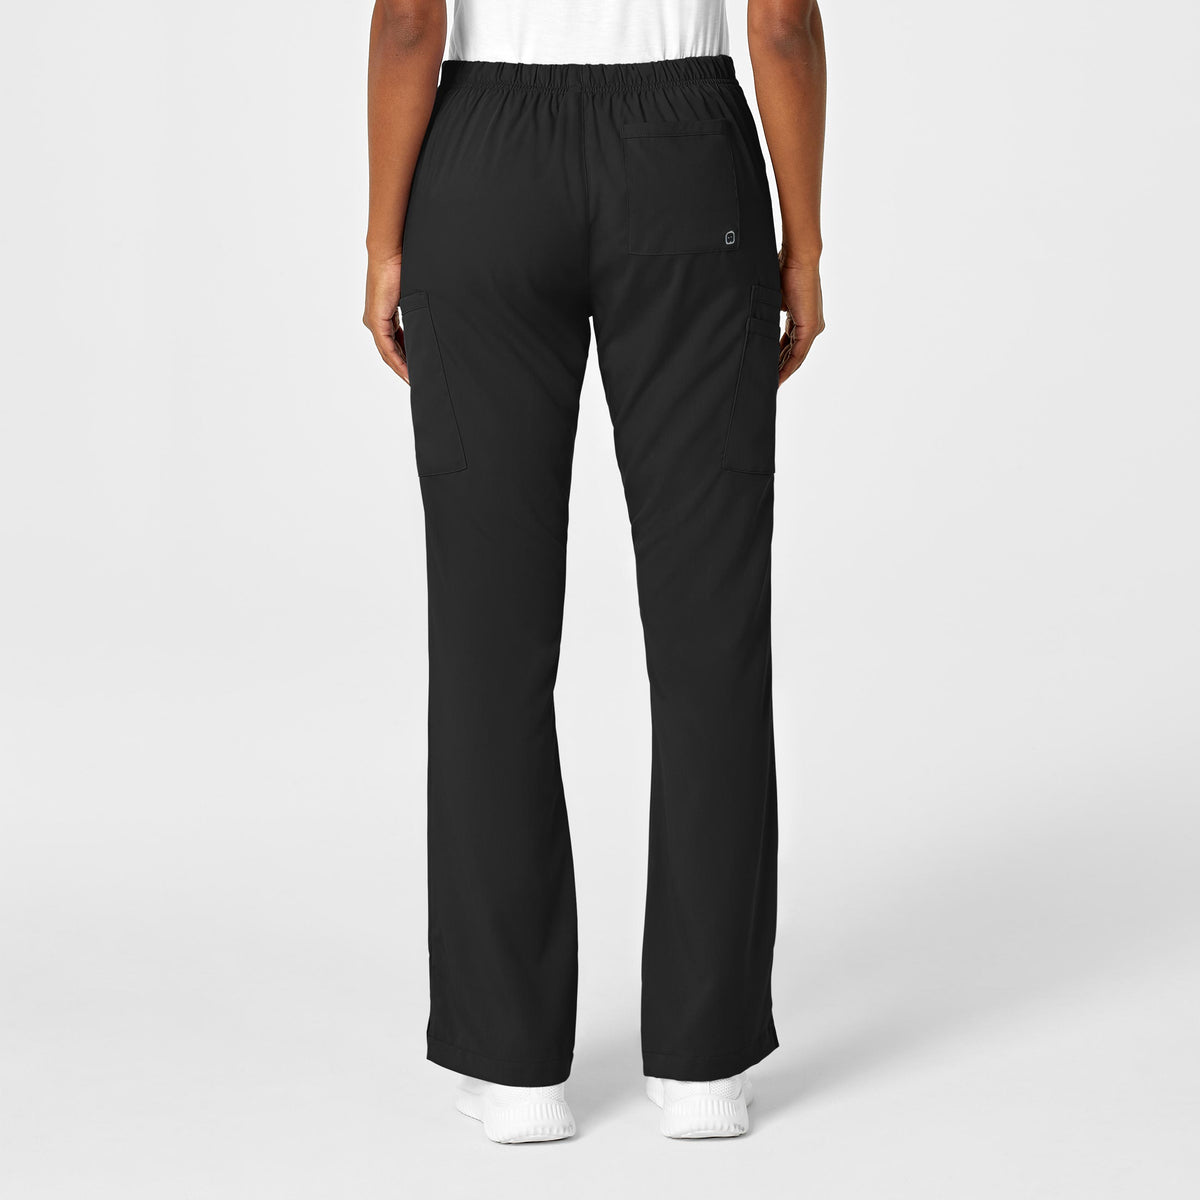 Champion, Pants & Jumpsuits, Champion Duo Dry Leggings Size Med